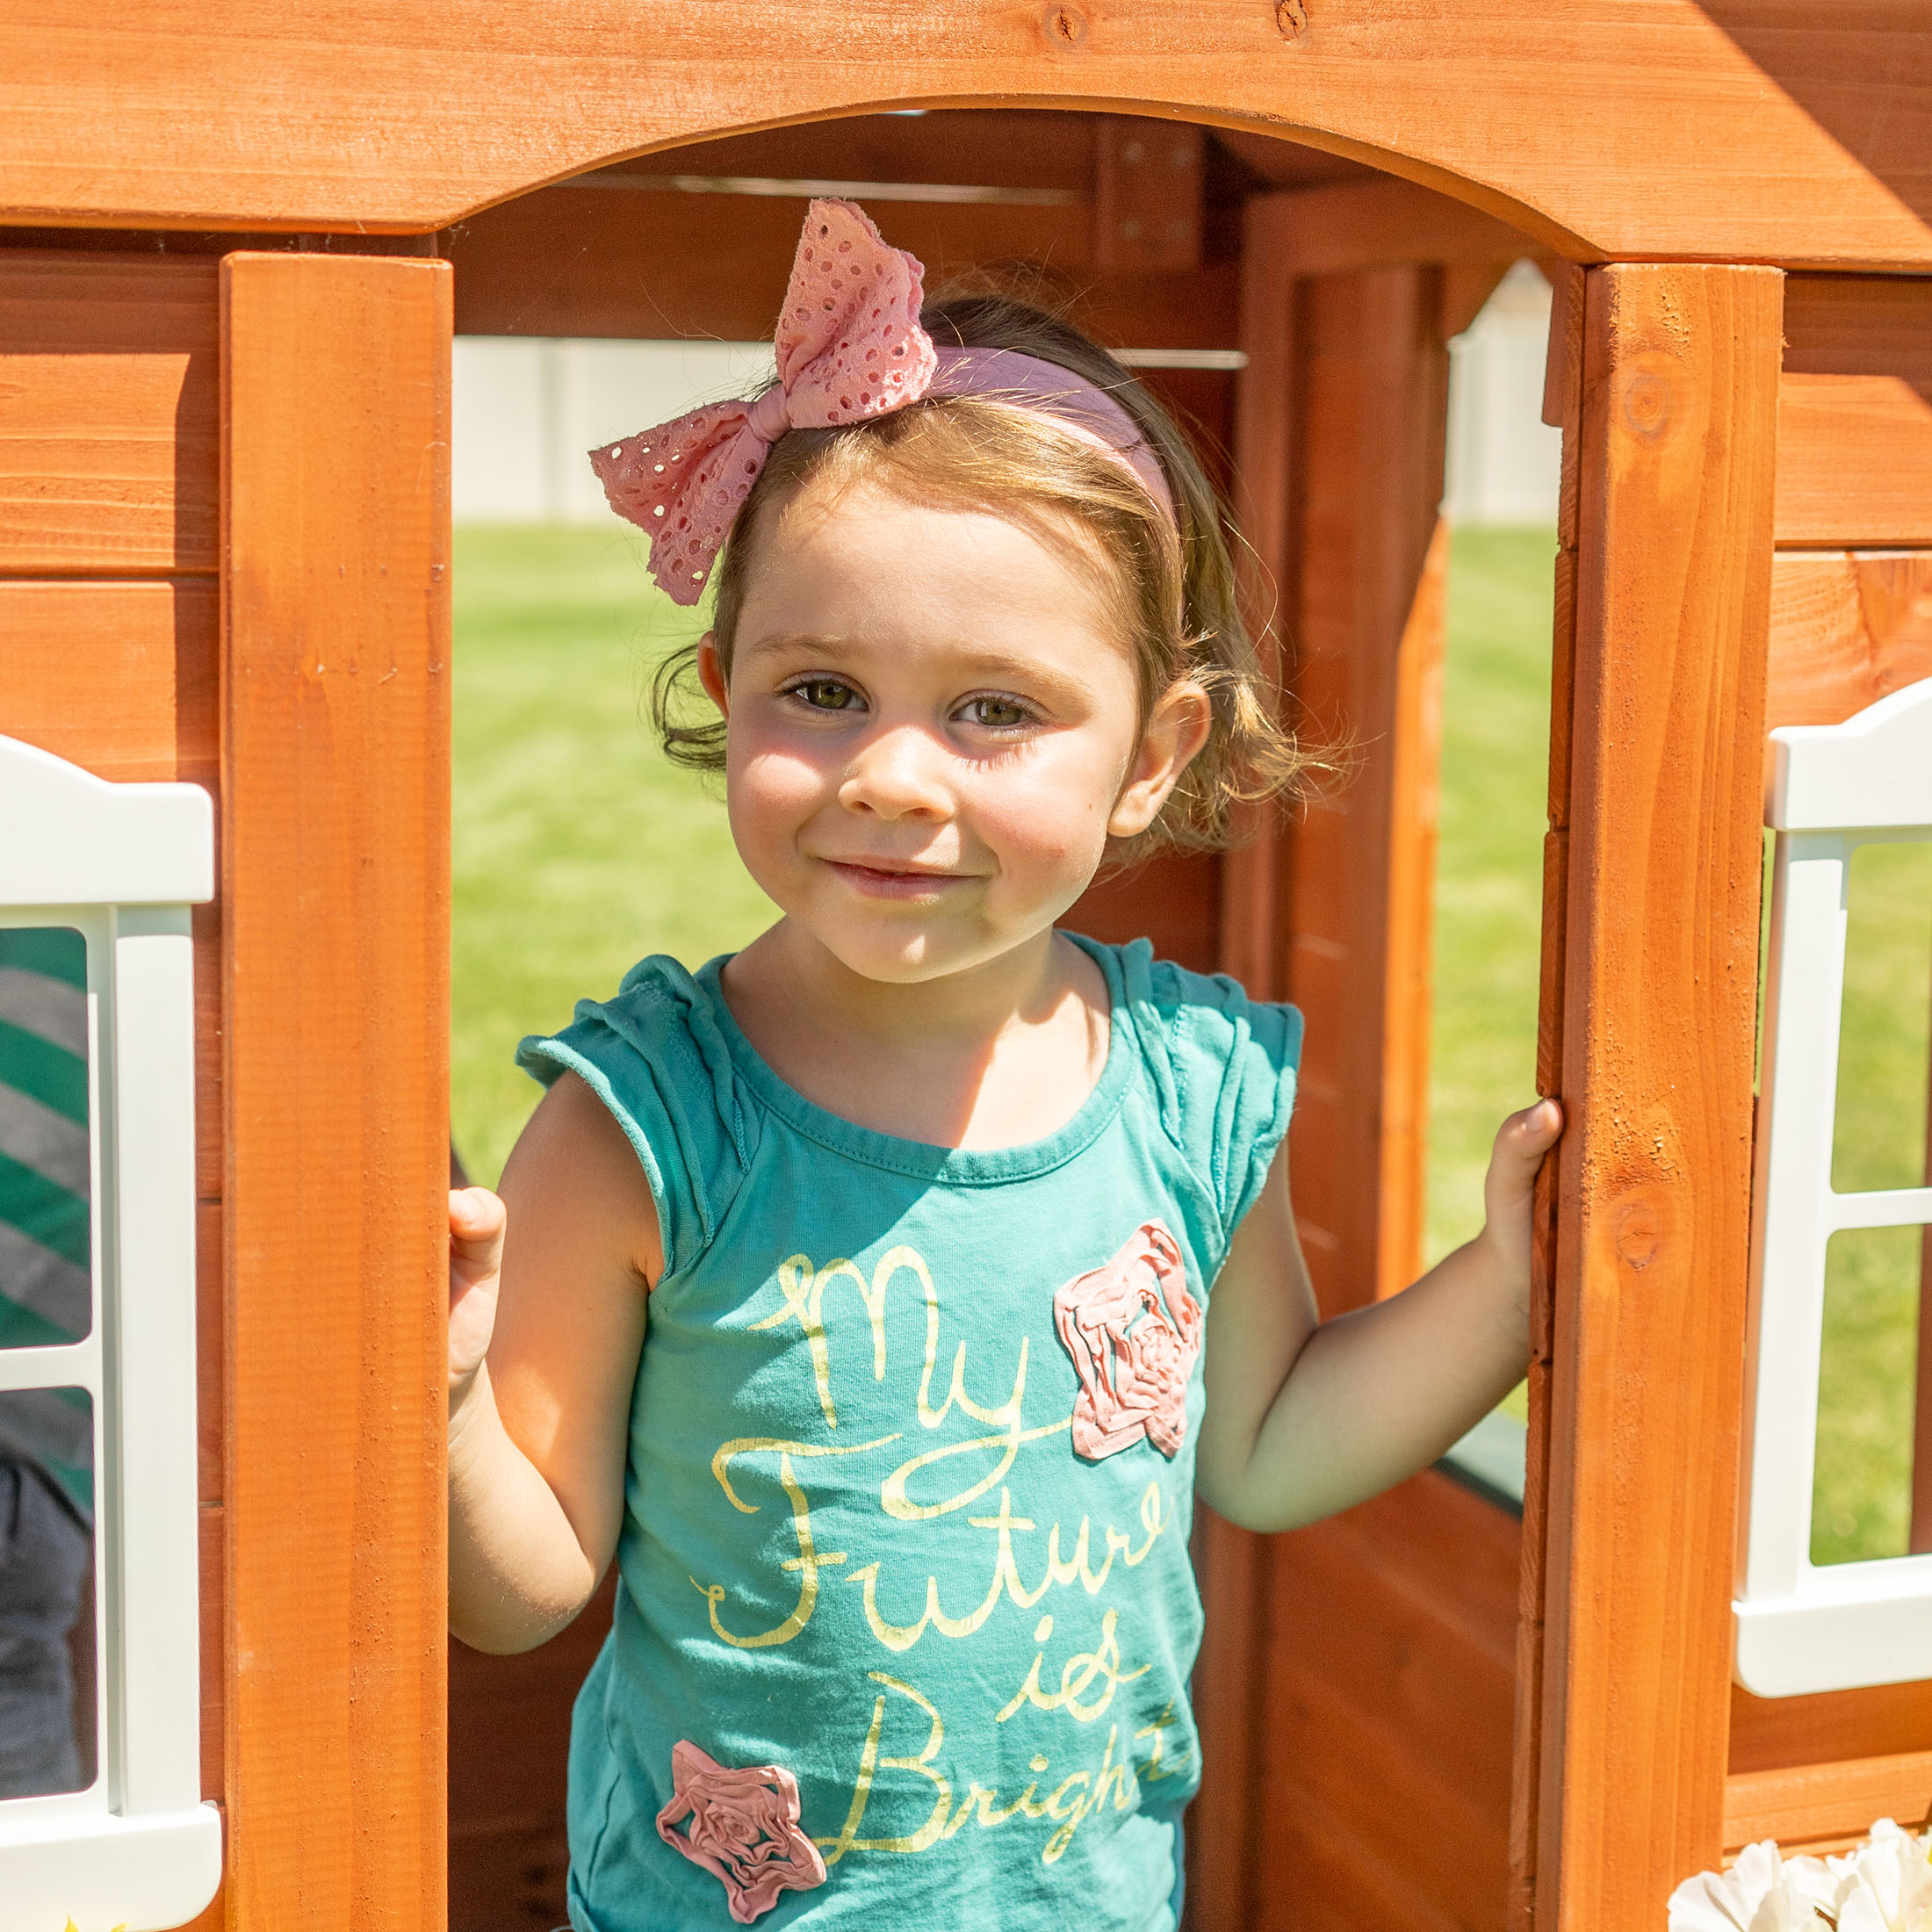 Sportspower Bellevue Kids Wooden Playhouse with Fun Colored Working Front Door, White Trim Windows, and Flower Pot Holders - image 10 of 13